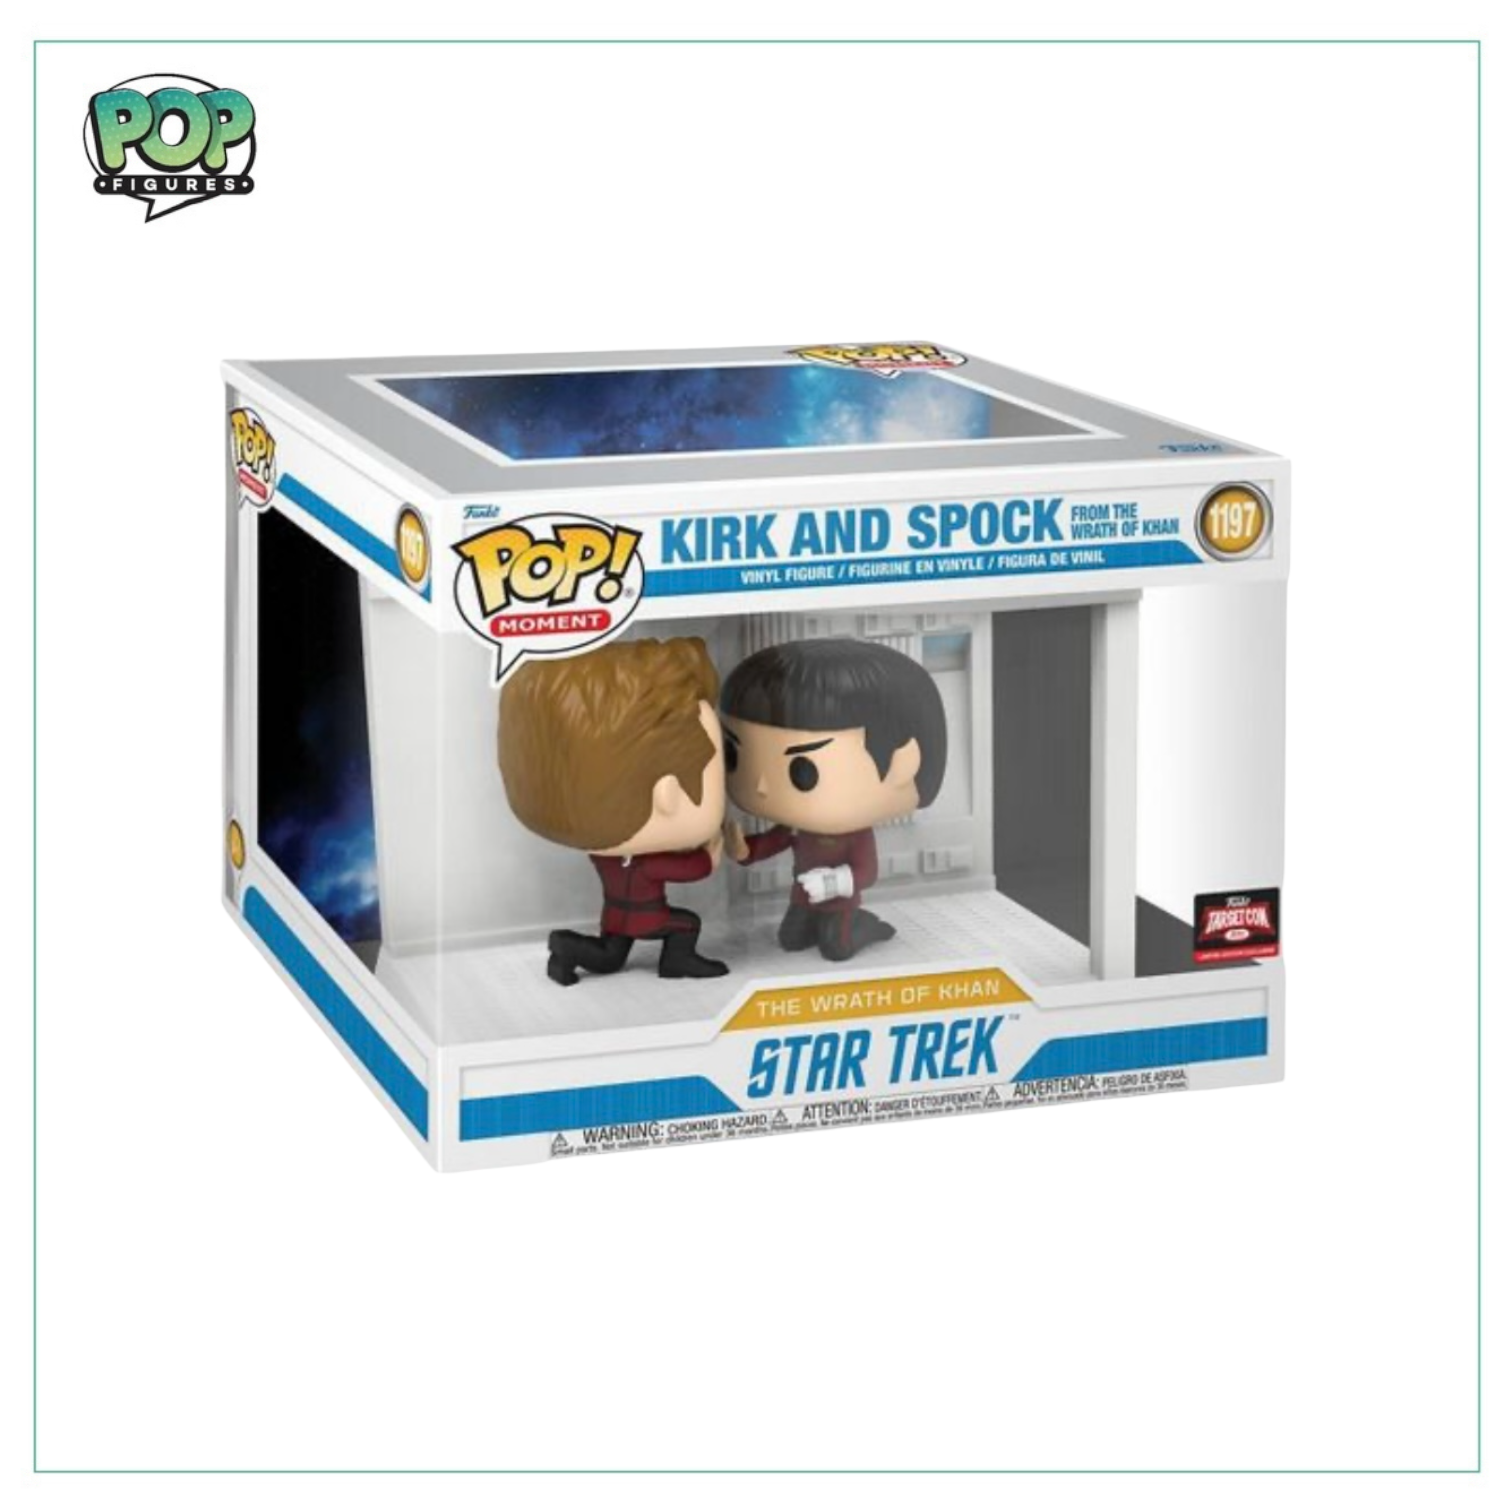 Kirk and Spock from The Wrath Of Khan #1197 Funko Pop! Moments Star Trek - Target Con Exclusive